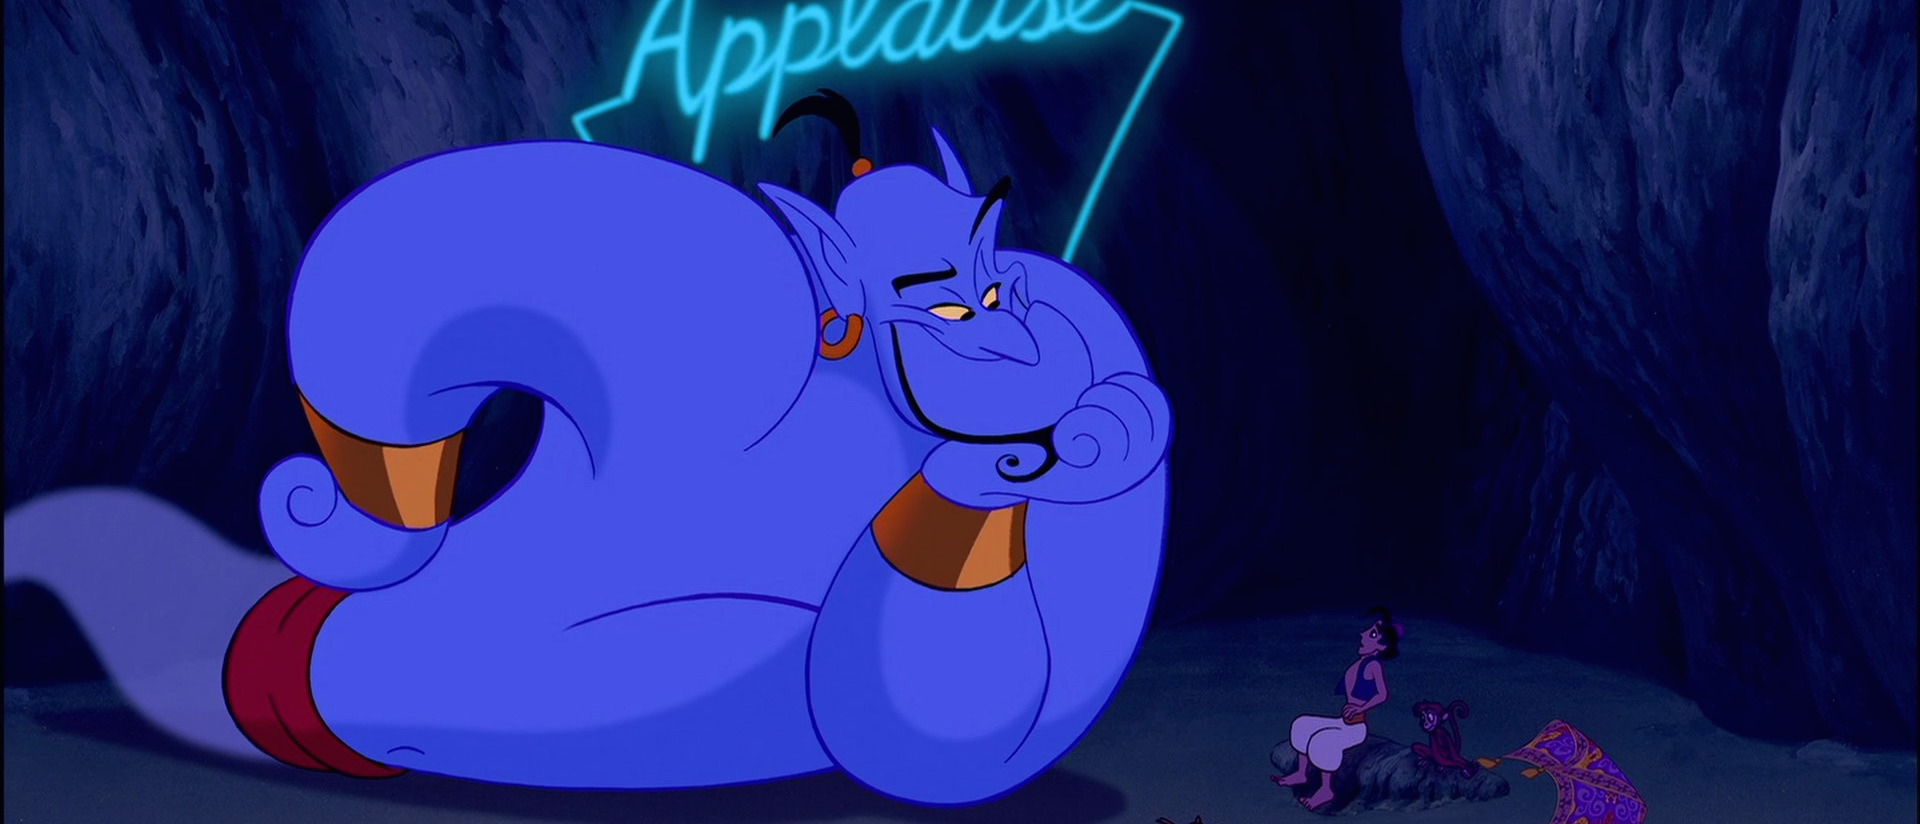 Aladdin Fan Theory Confirmed Yes That Is The Genie